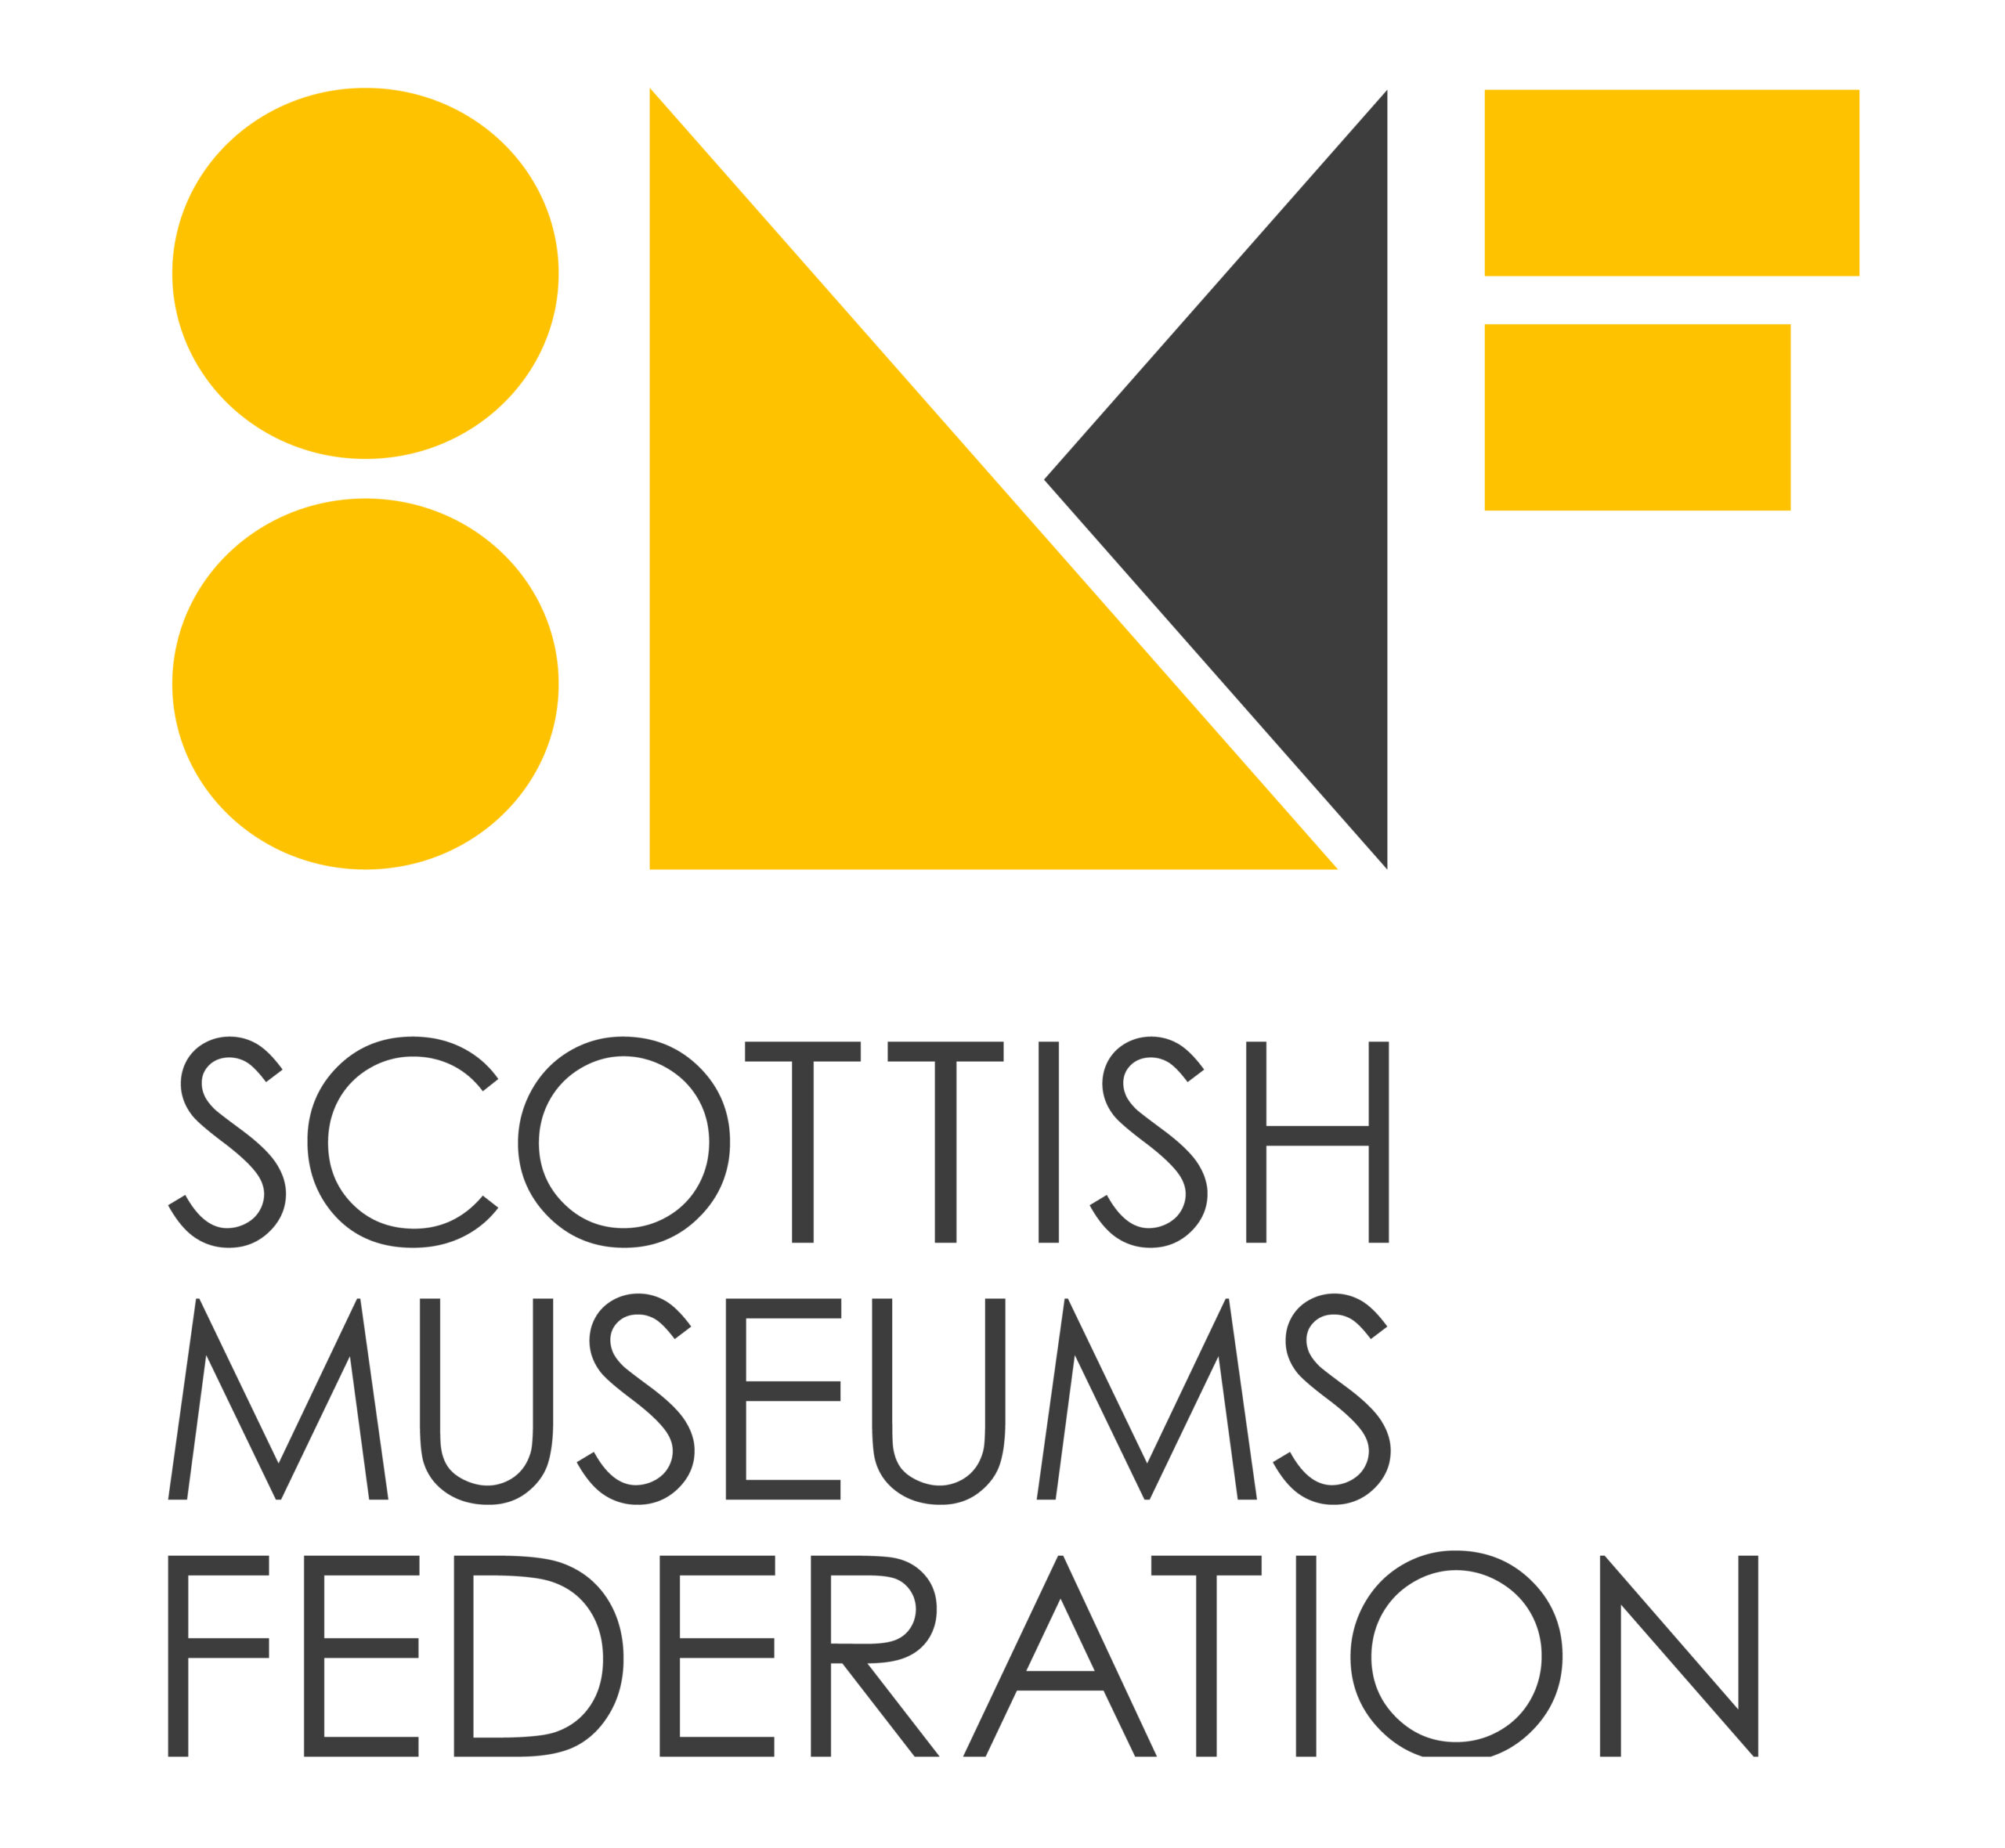 Scottish Museum Federation Logo SCOTTISH MUSEUMS FEDERATION in brown text. Yellow and brown shapes above.